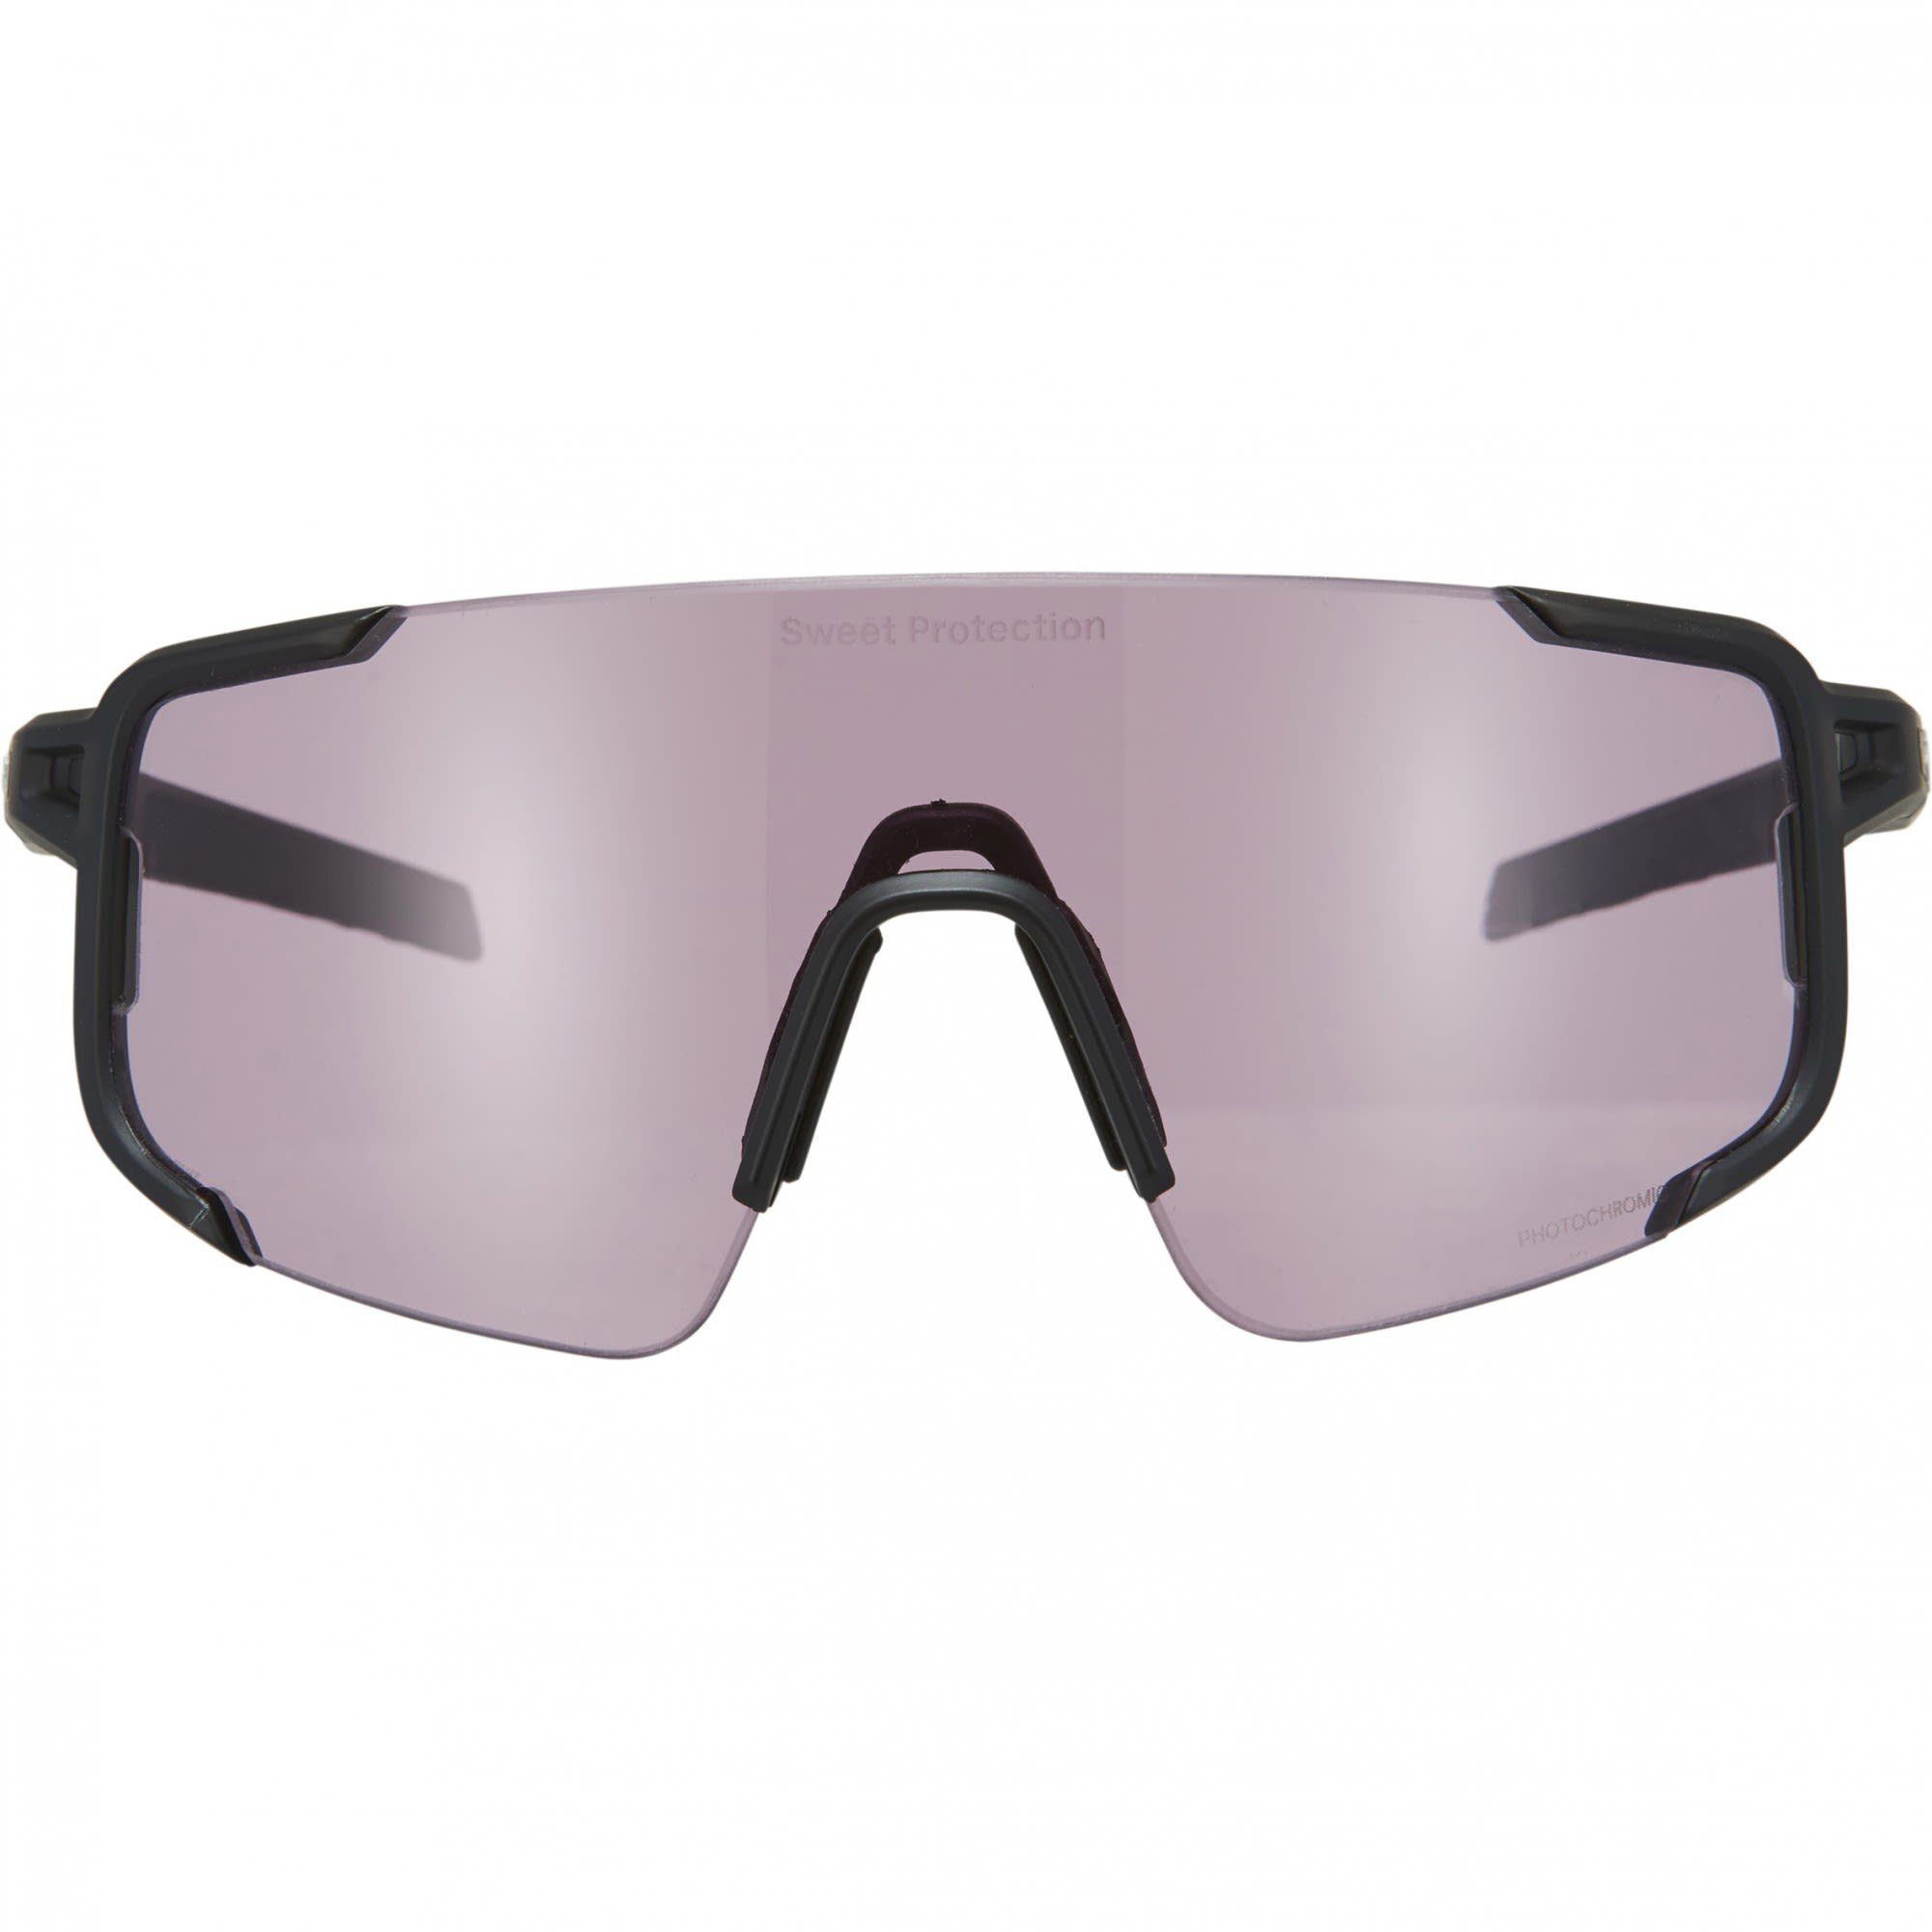 Sweet Protection Brillenetui Sweet Protection Ronin Rig Photochromic Lens